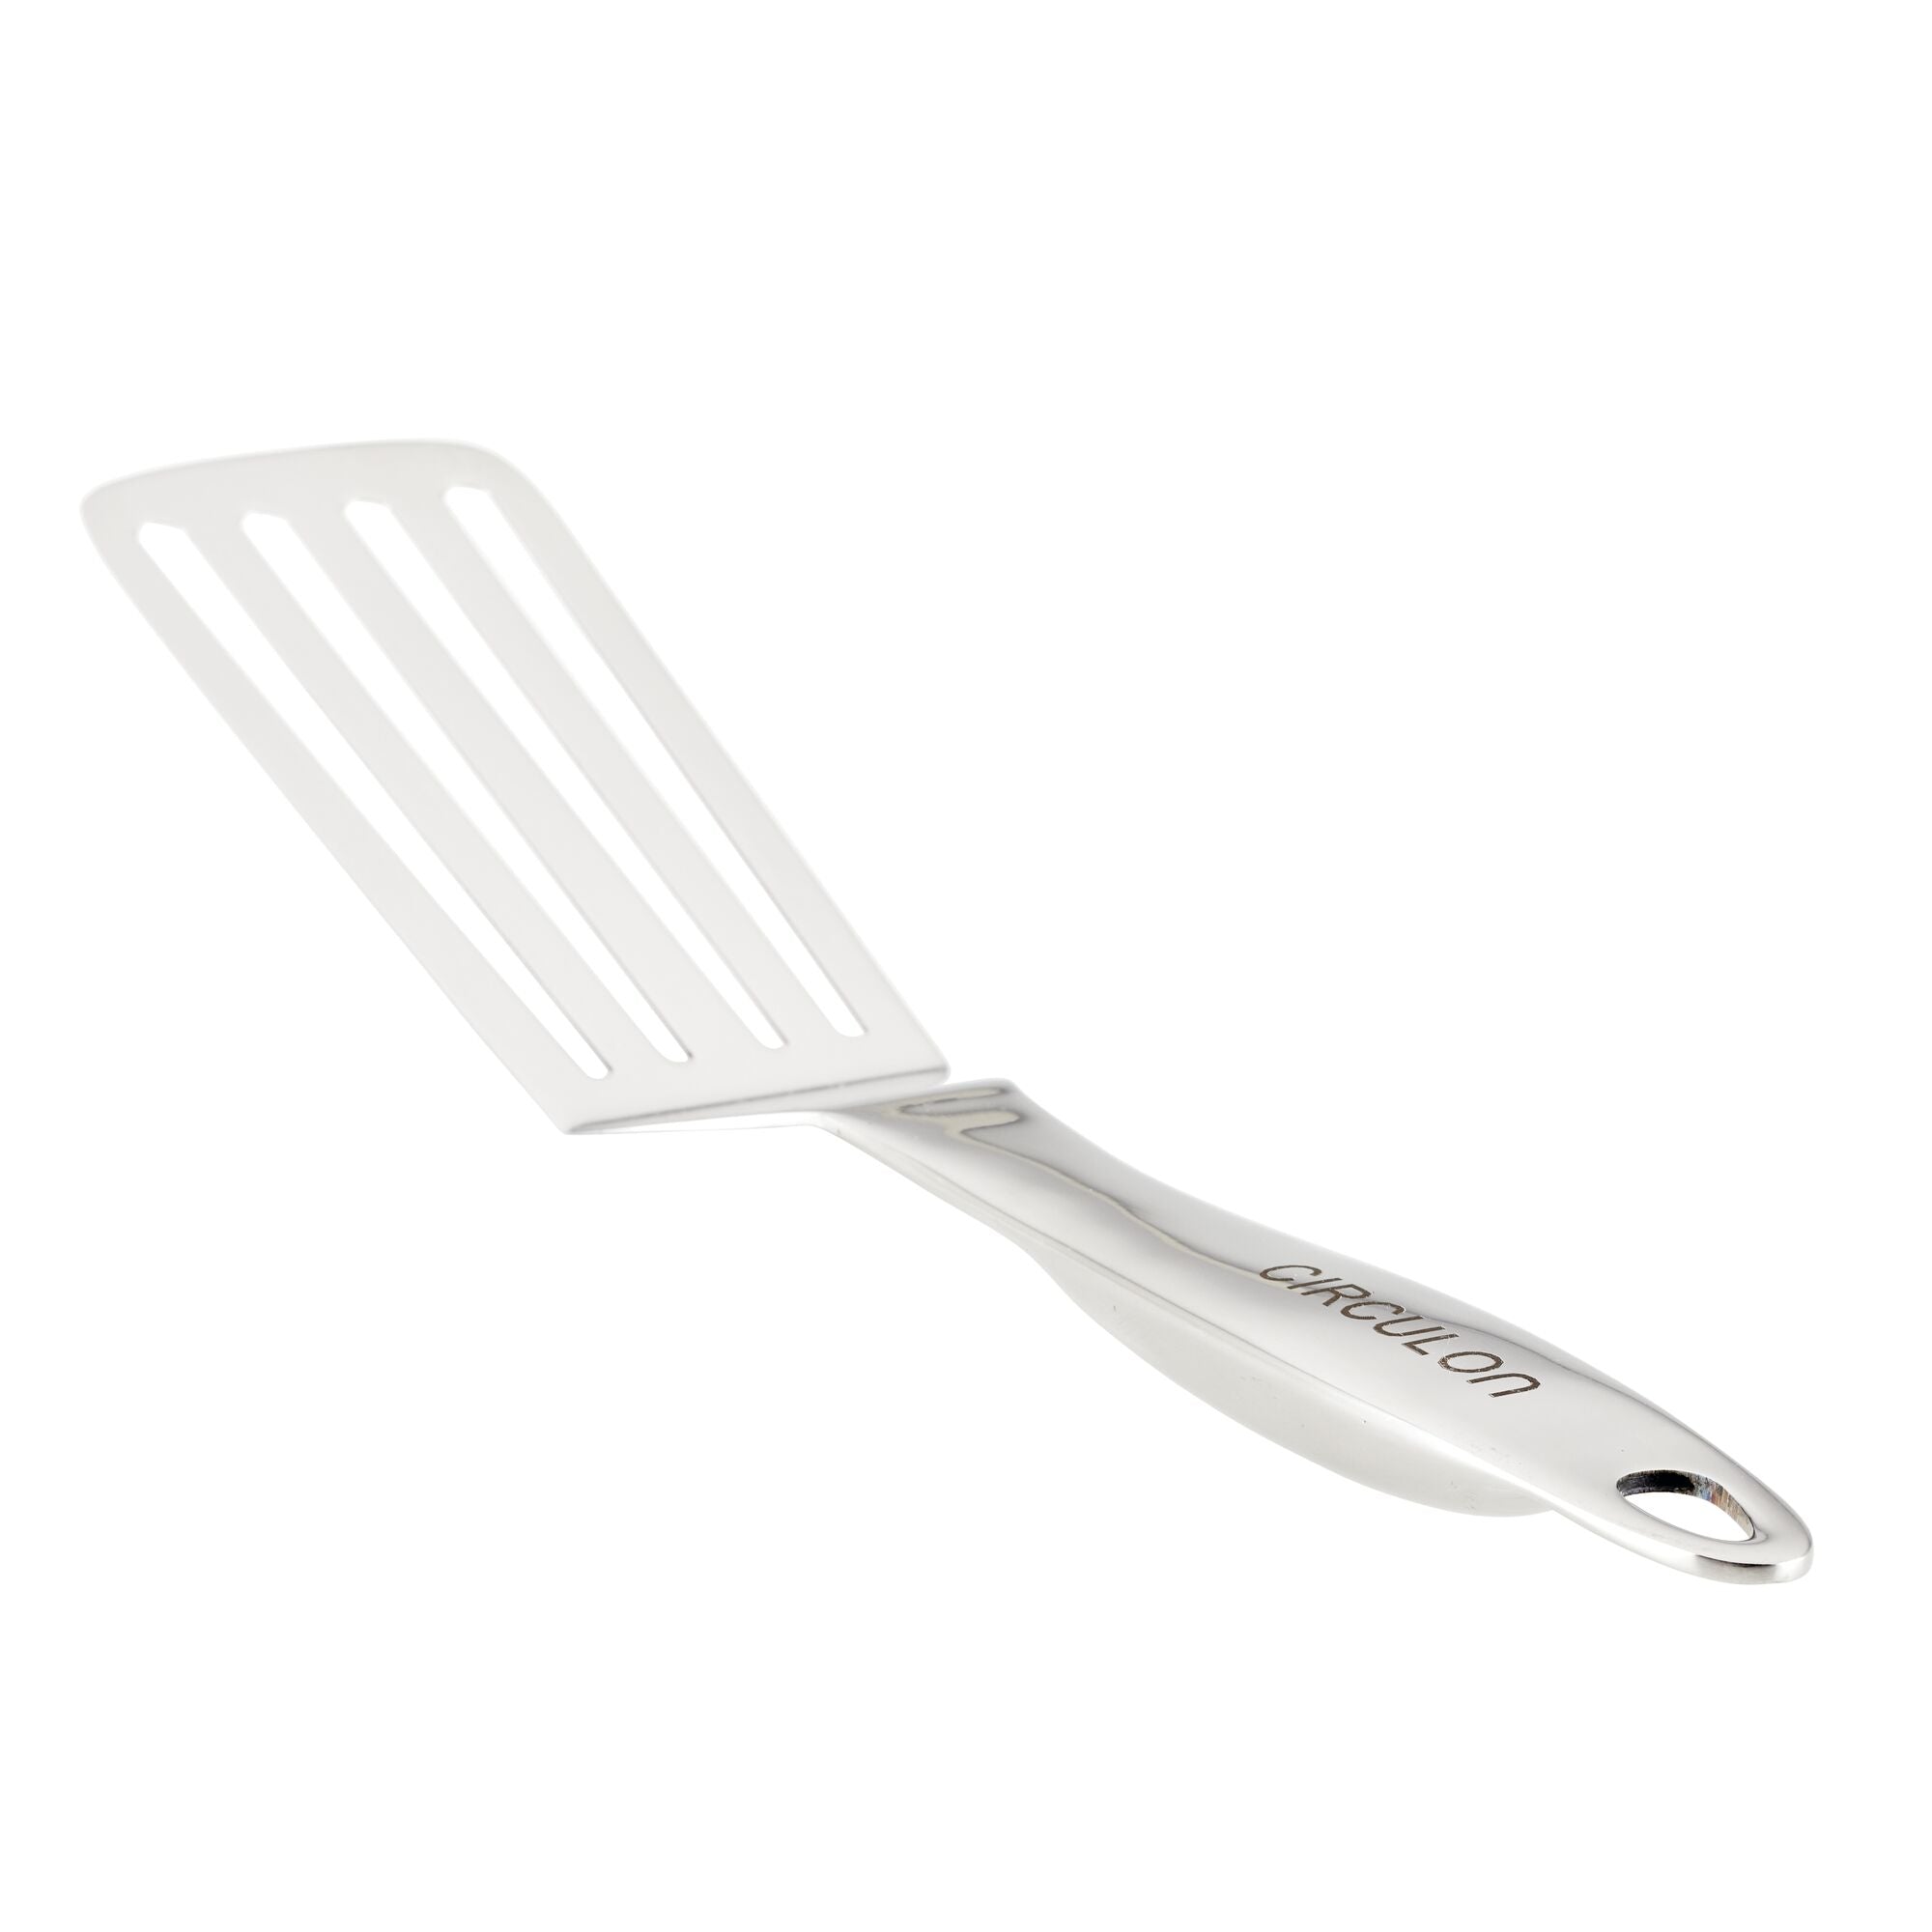 All-Clad Precision Stainless-Steel Food Turner + Spatula